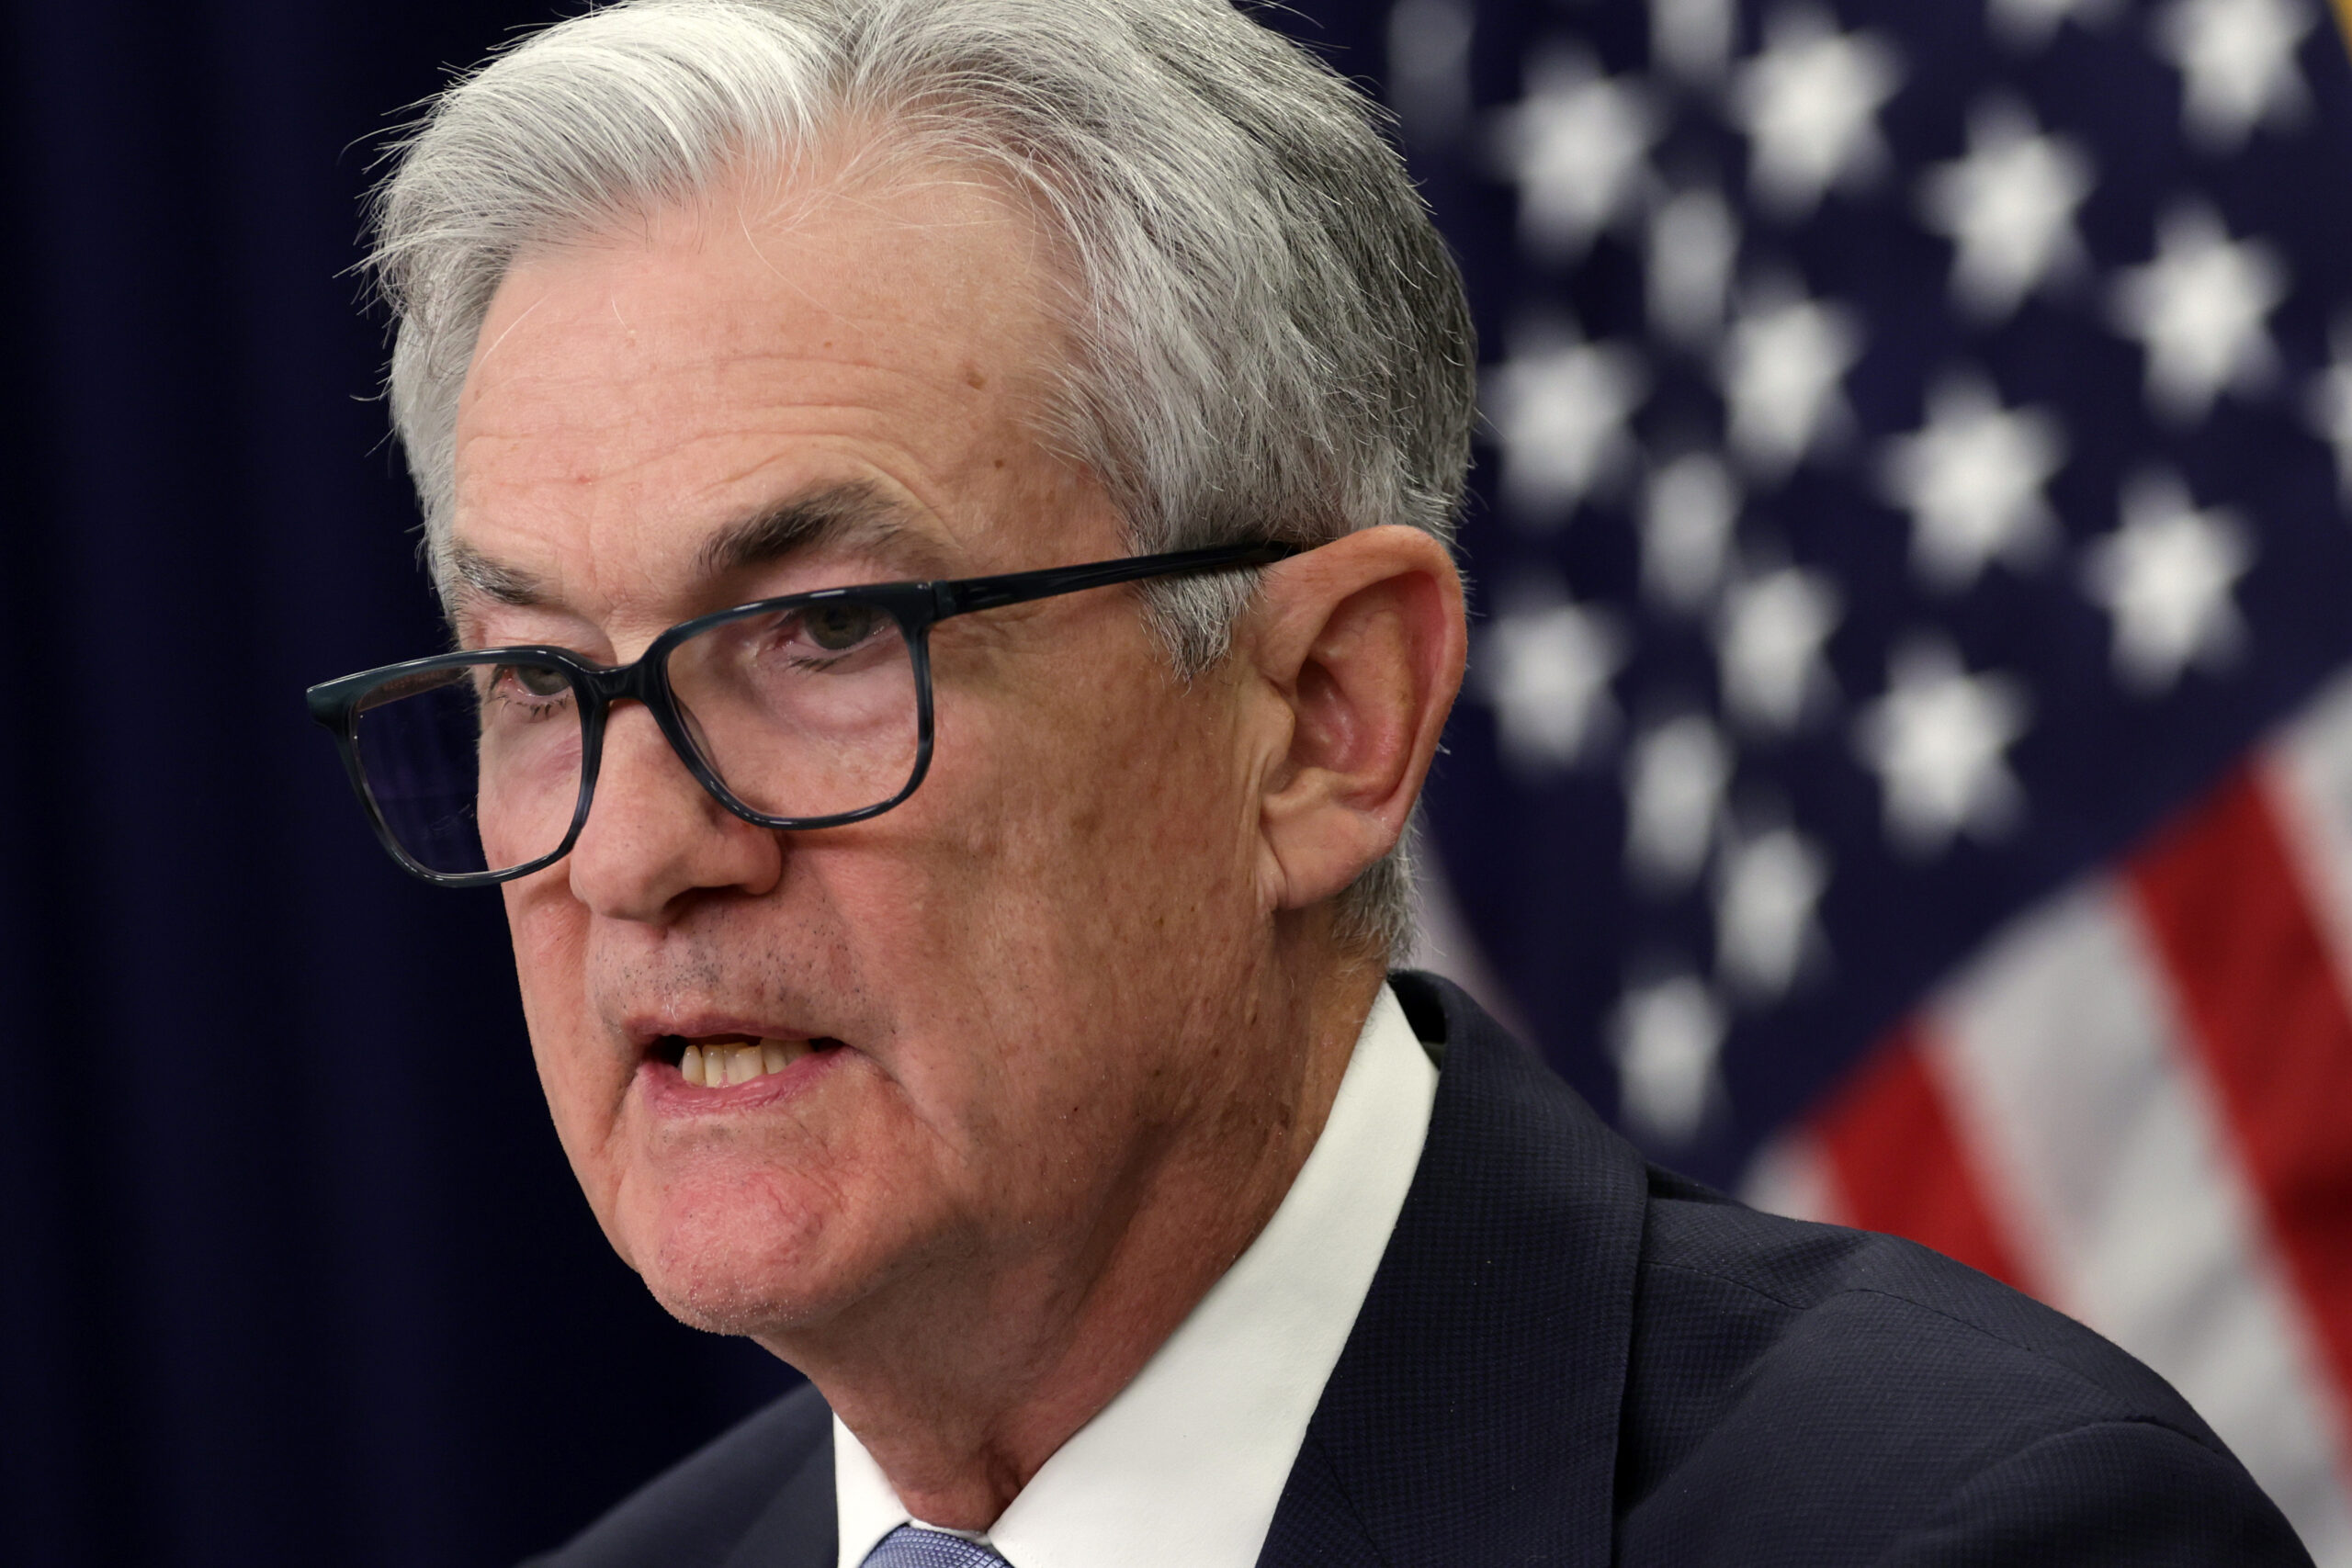 Federal Reserve Chair Jerome Powell speaks at a press conference.